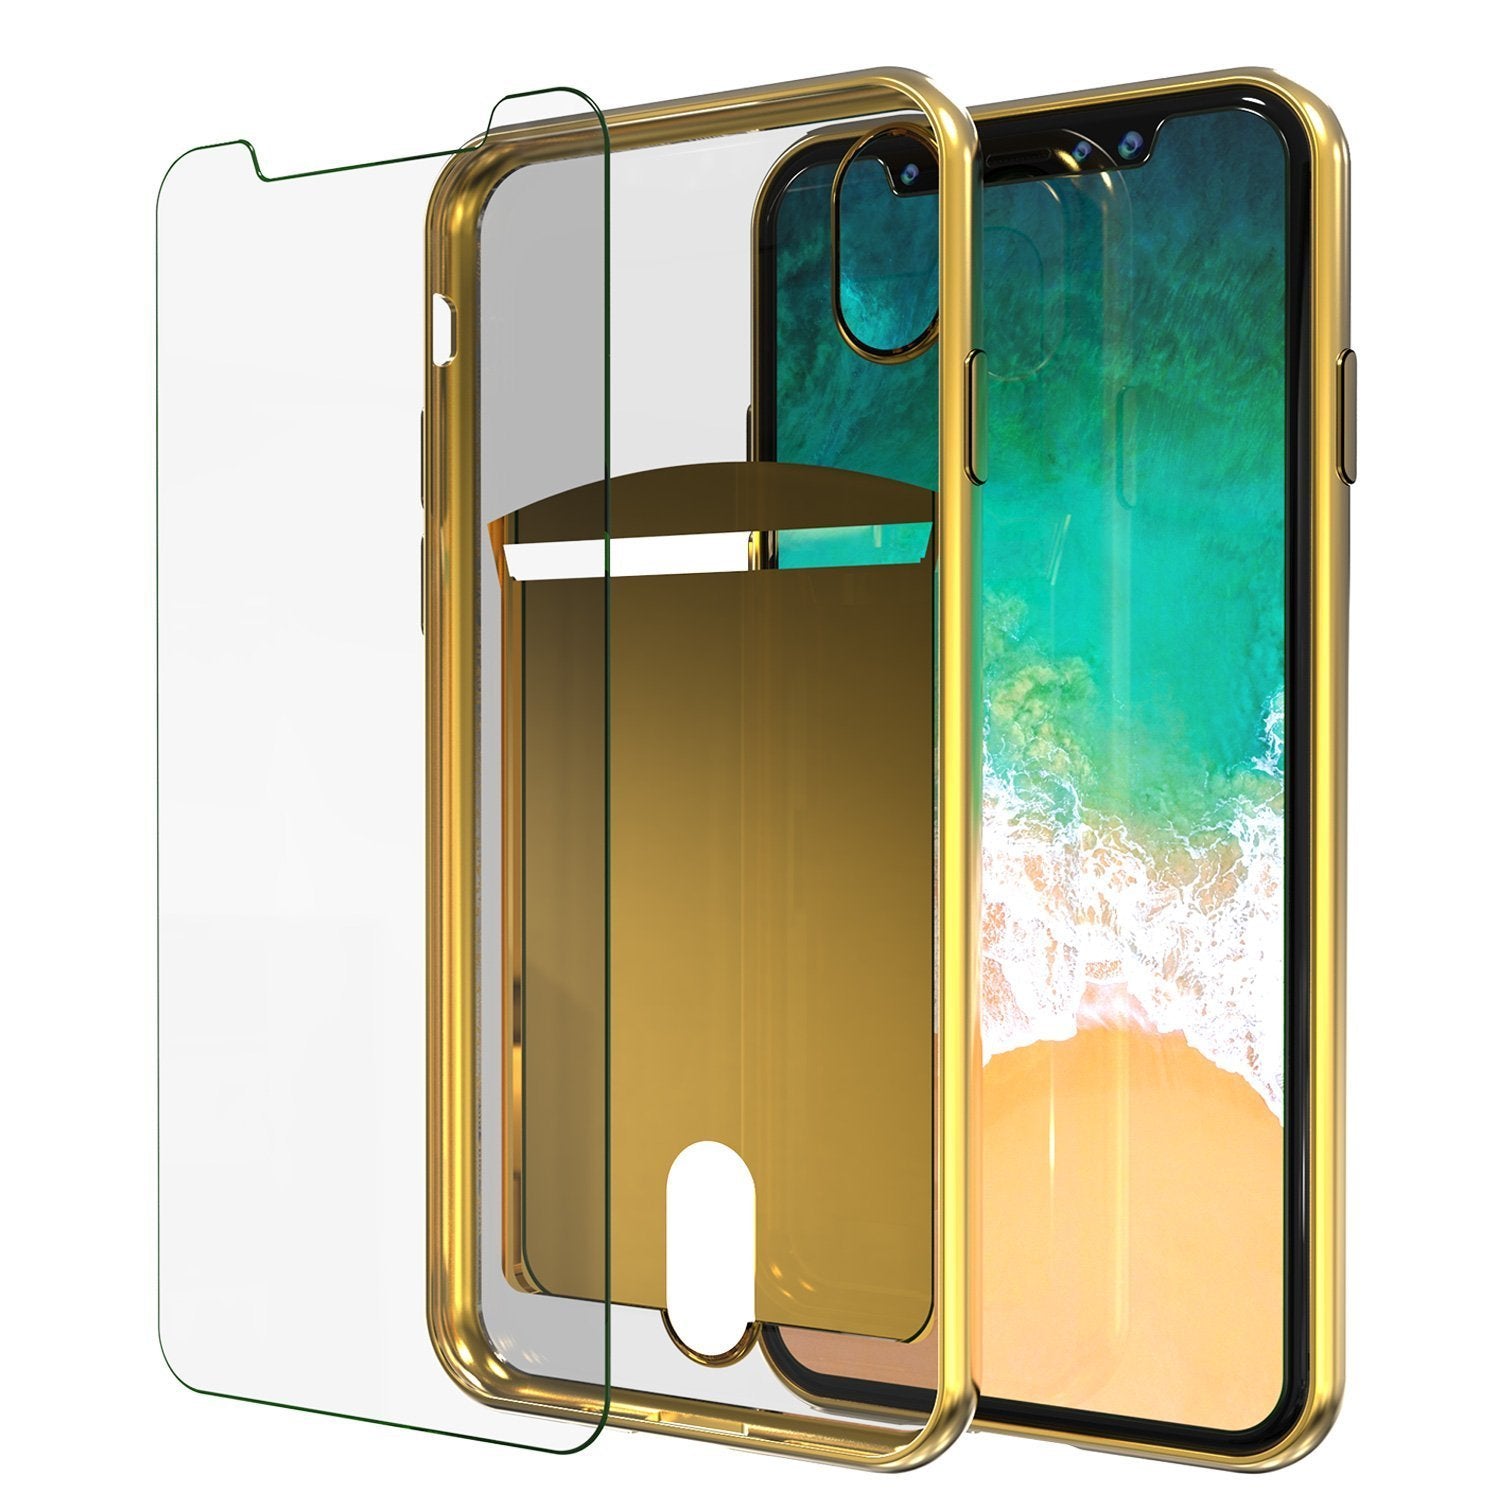 iPhone 8 Case, PUNKcase [LUCID Series] Slim Fit Protective Dual Layer Armor Cover W/ Scratch Resistant Screen Protector [GOLD]